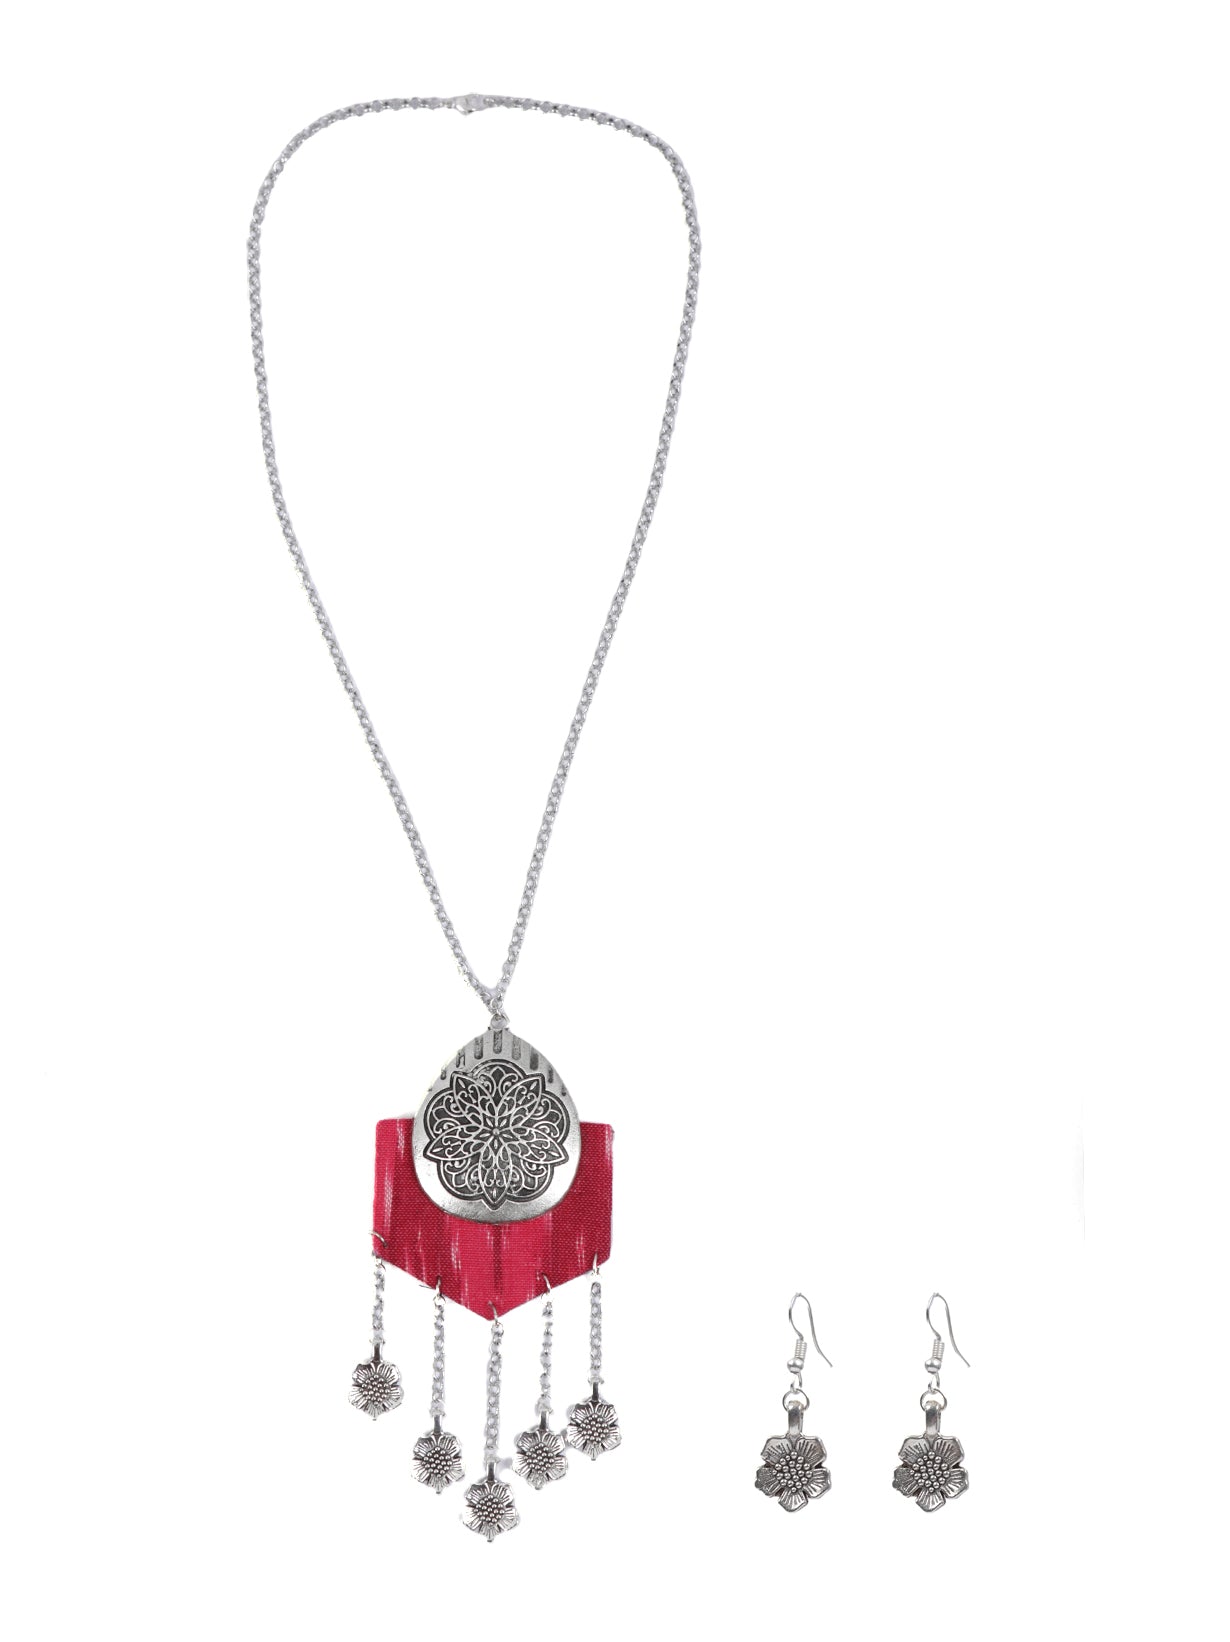 Flower Motifs Fabric Pendant Necklace Set with Metal Strings